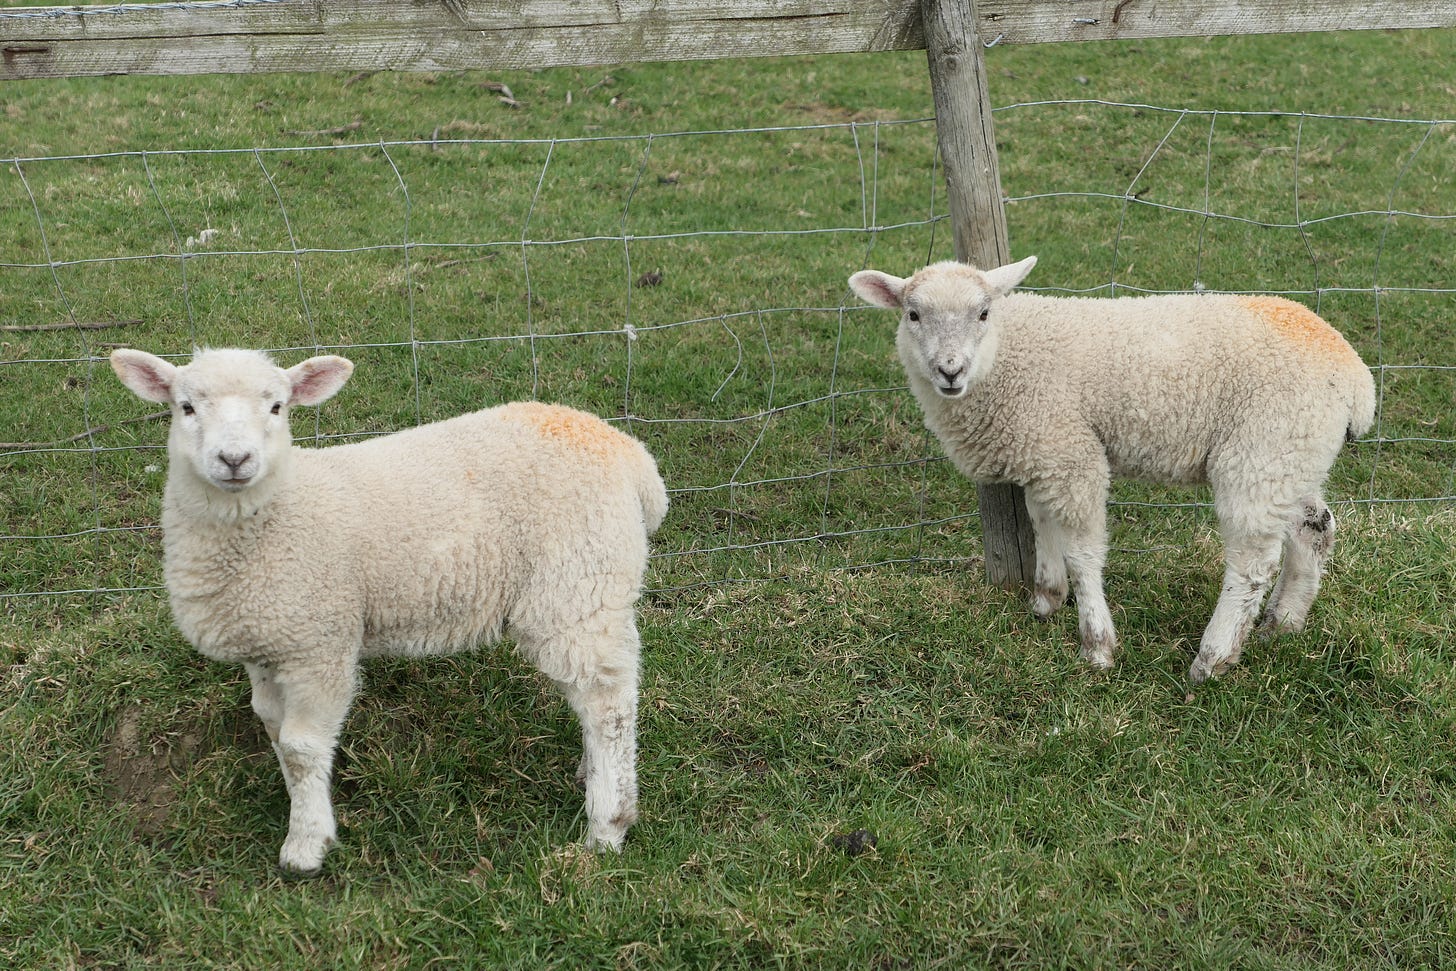 Lambs in Wolfhampcote earlier this year (c) South Rugby News